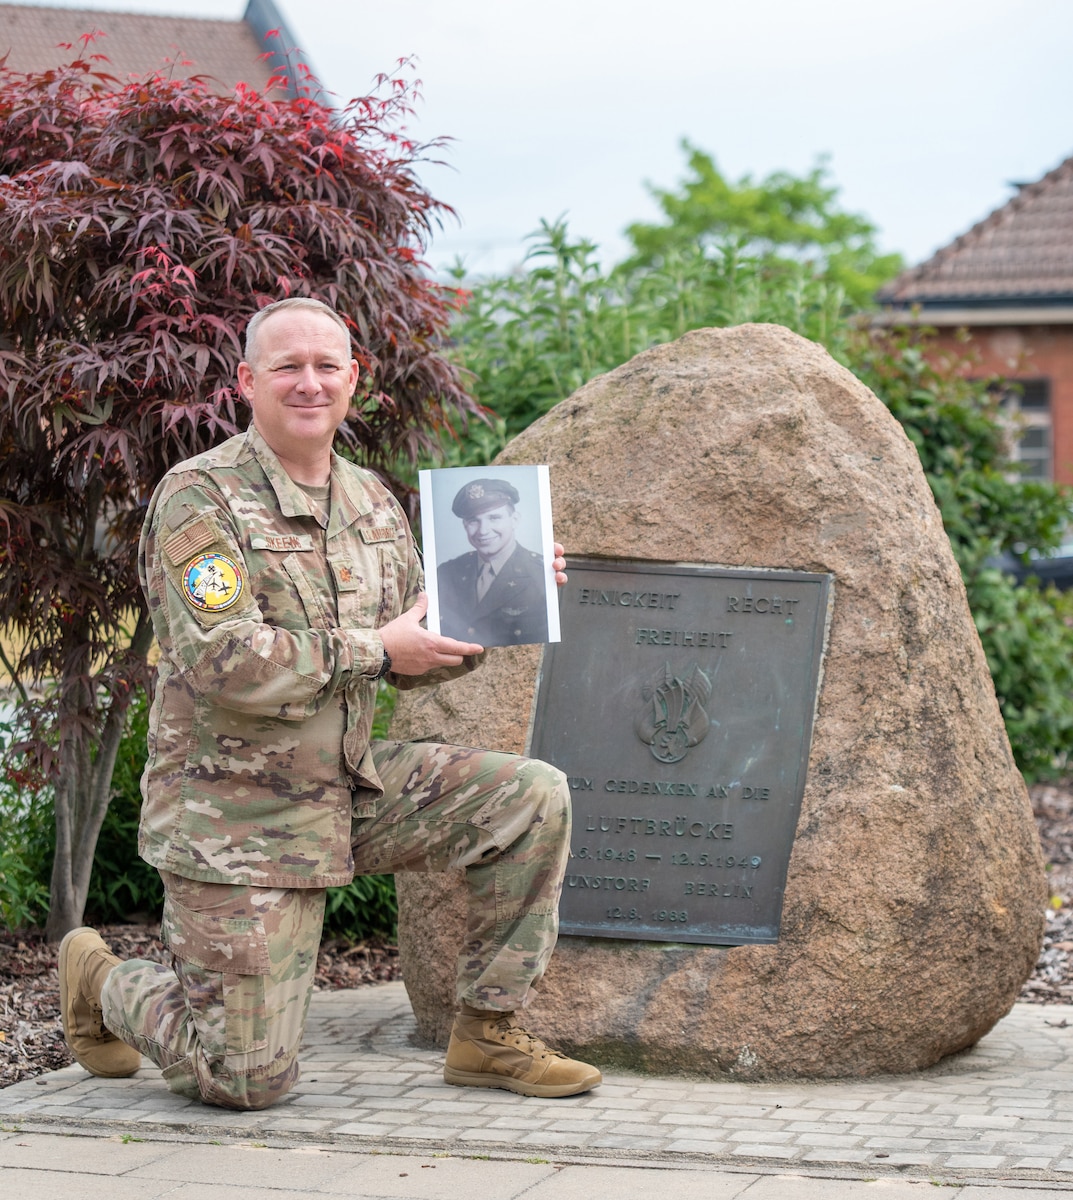 Maj. Matthew Skeens, a logistics readiness officer with the 123rd Contingency Response Element from Louisville, Kentucky, stands by a memorial on Wunstorf Air Base, Germany, June 7, 2023. The stone commemorates those who served in the famous Berlin Airlift. Skeens, who is deployed here in support of Exercise Air Defender 23, holds a picture of his grandfather, U.S. Air Force pilot Kenneth Skeens, who flew in that mission 75 years ago from this base. Exercise Air Defender integrates both U.S. and Allied air power to defend shared values, while leveraging and strengthening vital partnerships to deter aggression around the world. (U.S. Air National Guard photo by Senior Master Sgt. Vicky Spesard)